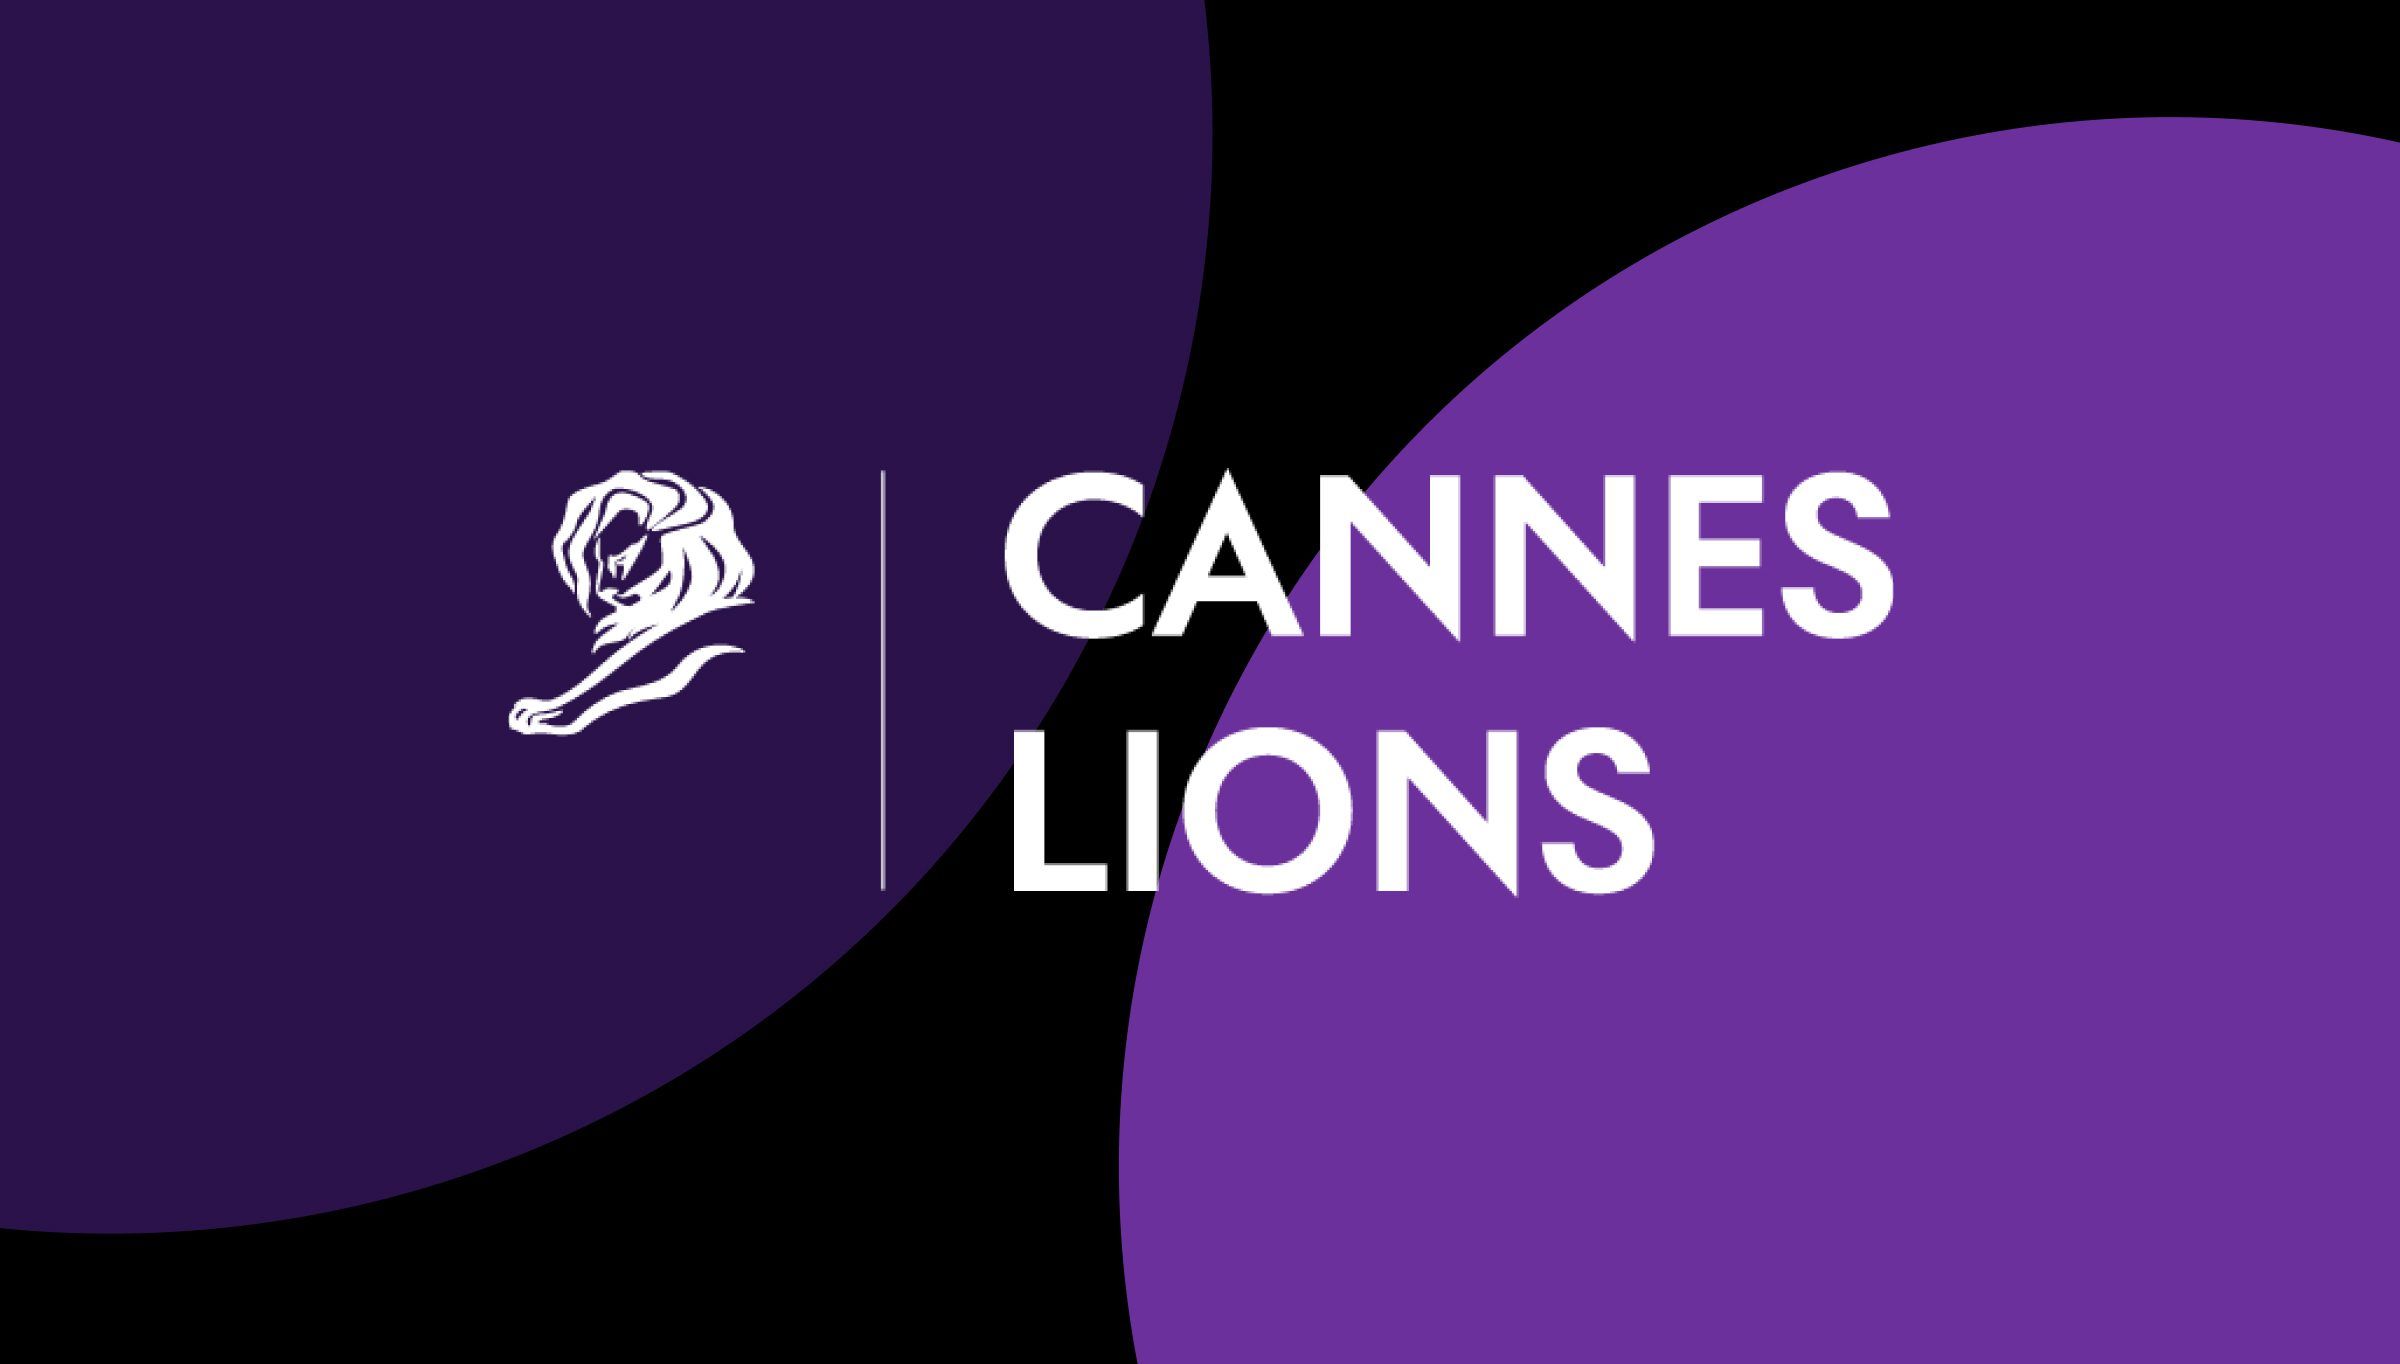 Cannes Lions Festival of Creativity